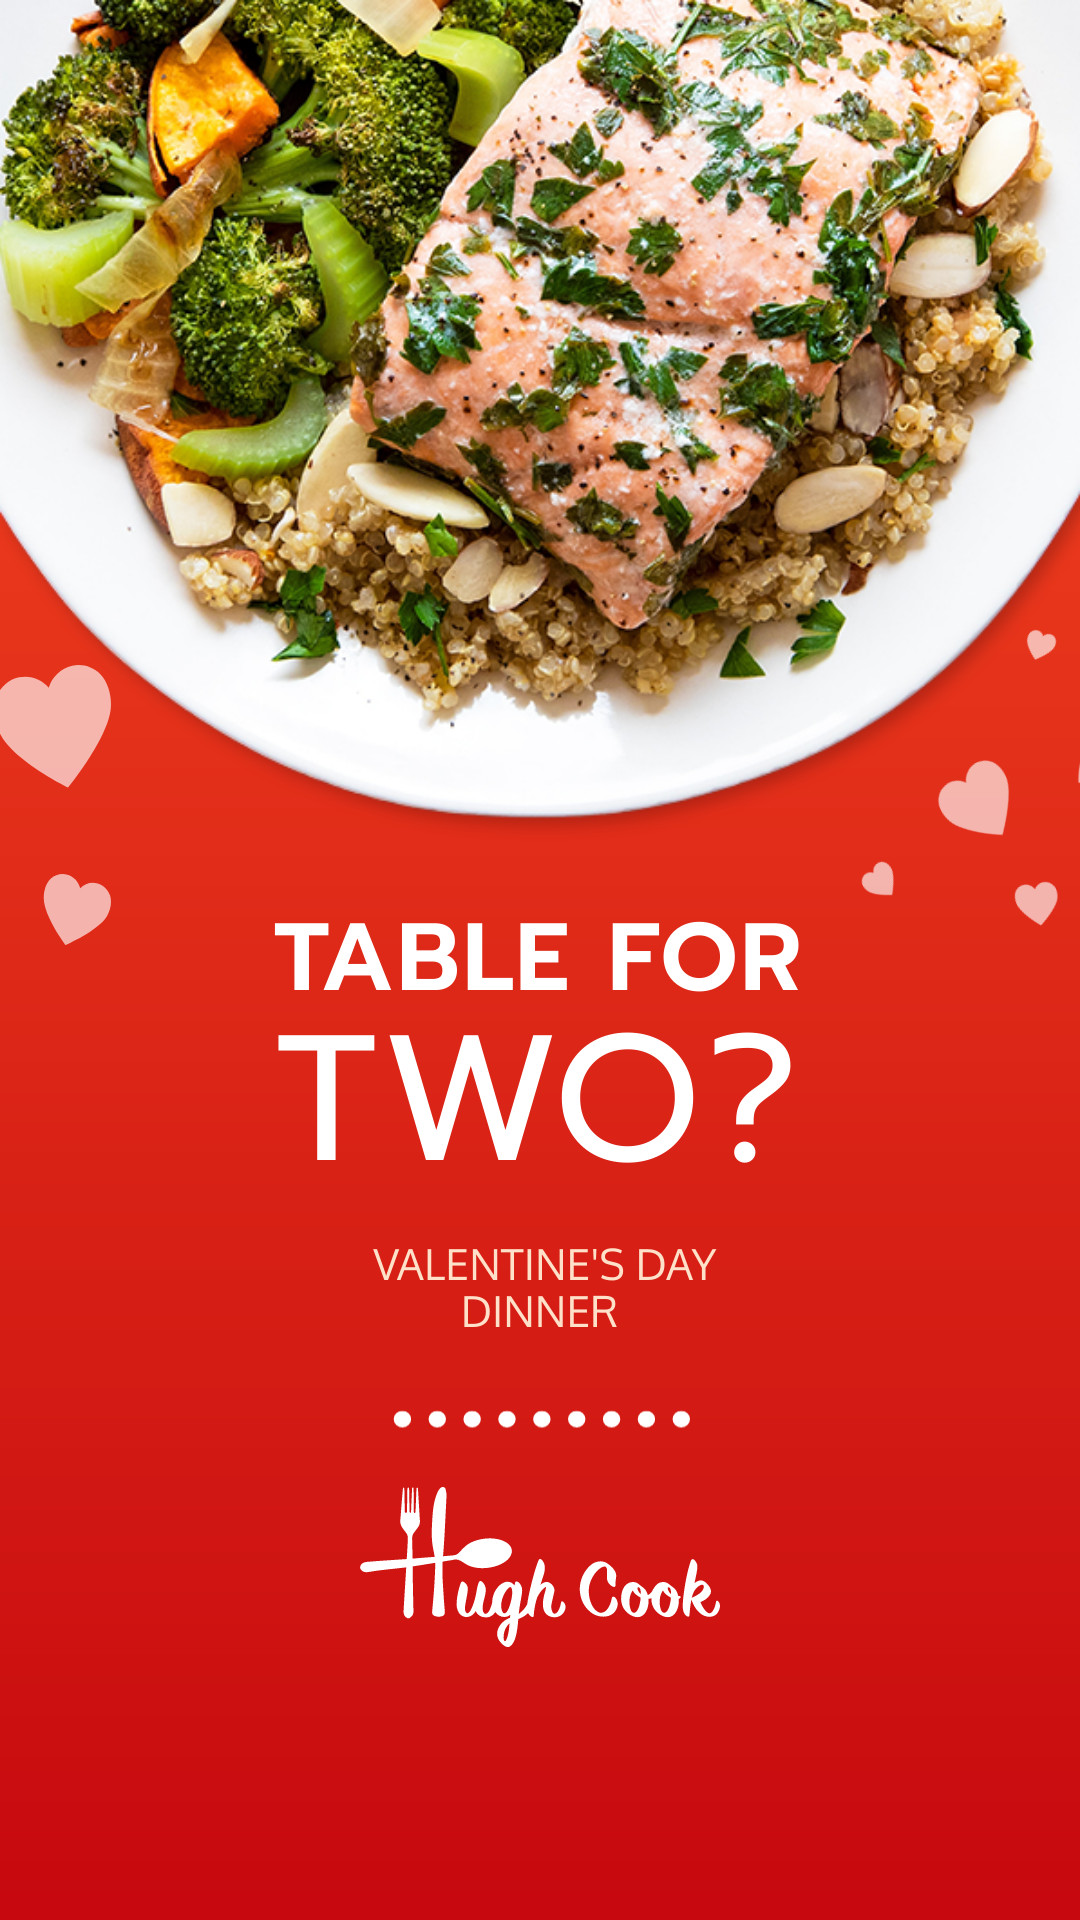 Table For Two on Valentine's Day Inline Rectangle 300x250